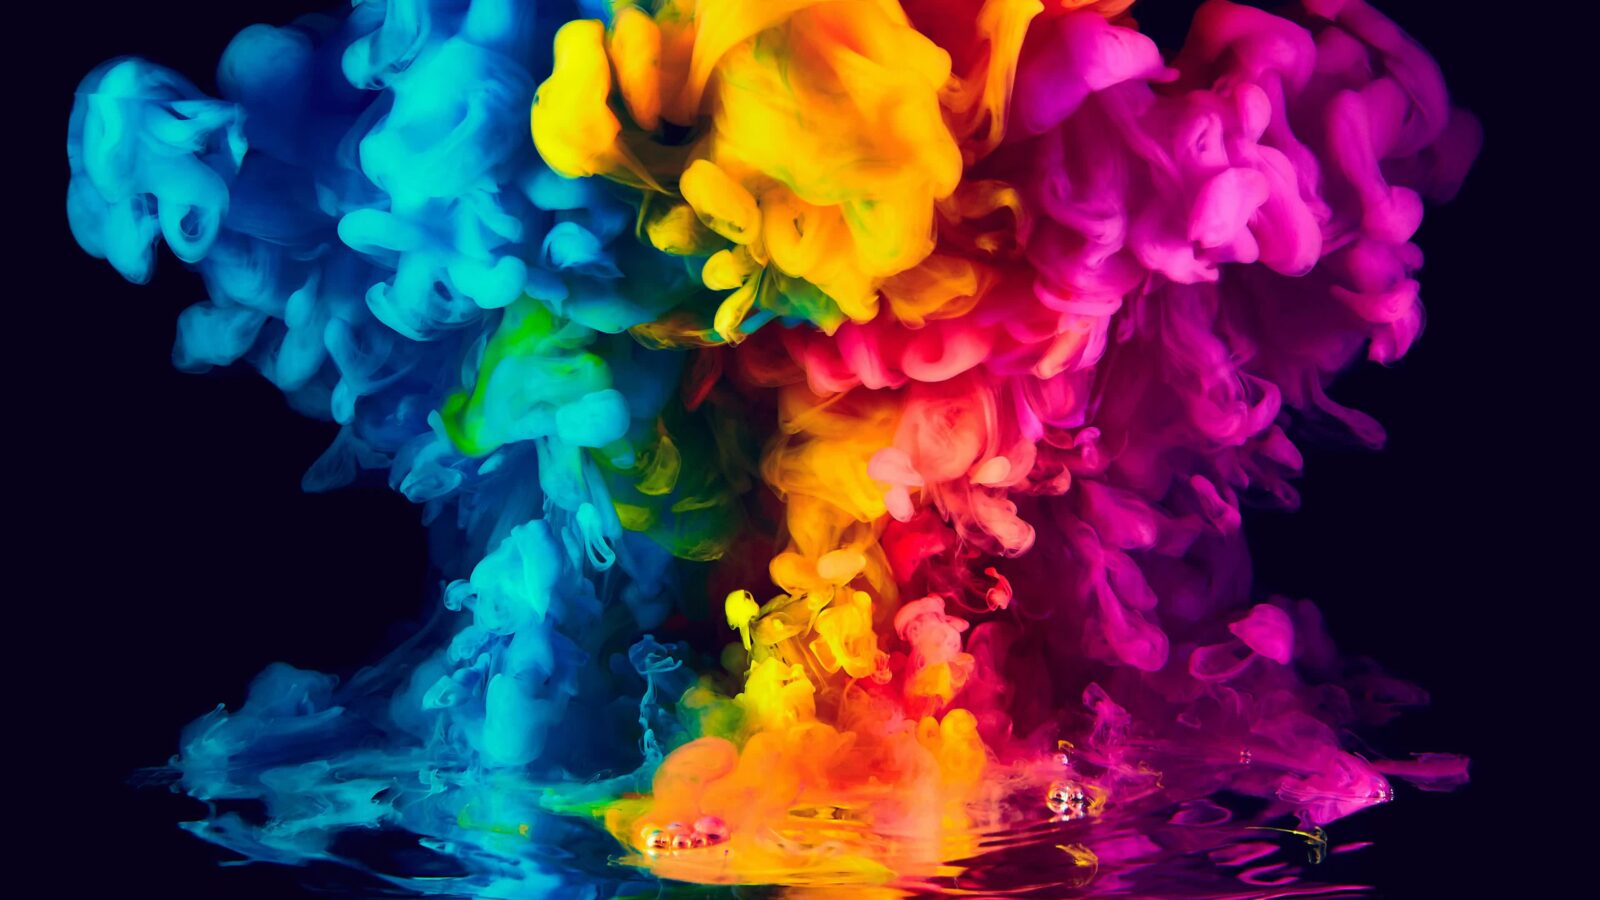 Cool Colorful Abstract Smoke 4K - Free Live Wallpaper - Live Desktop Wallpapers